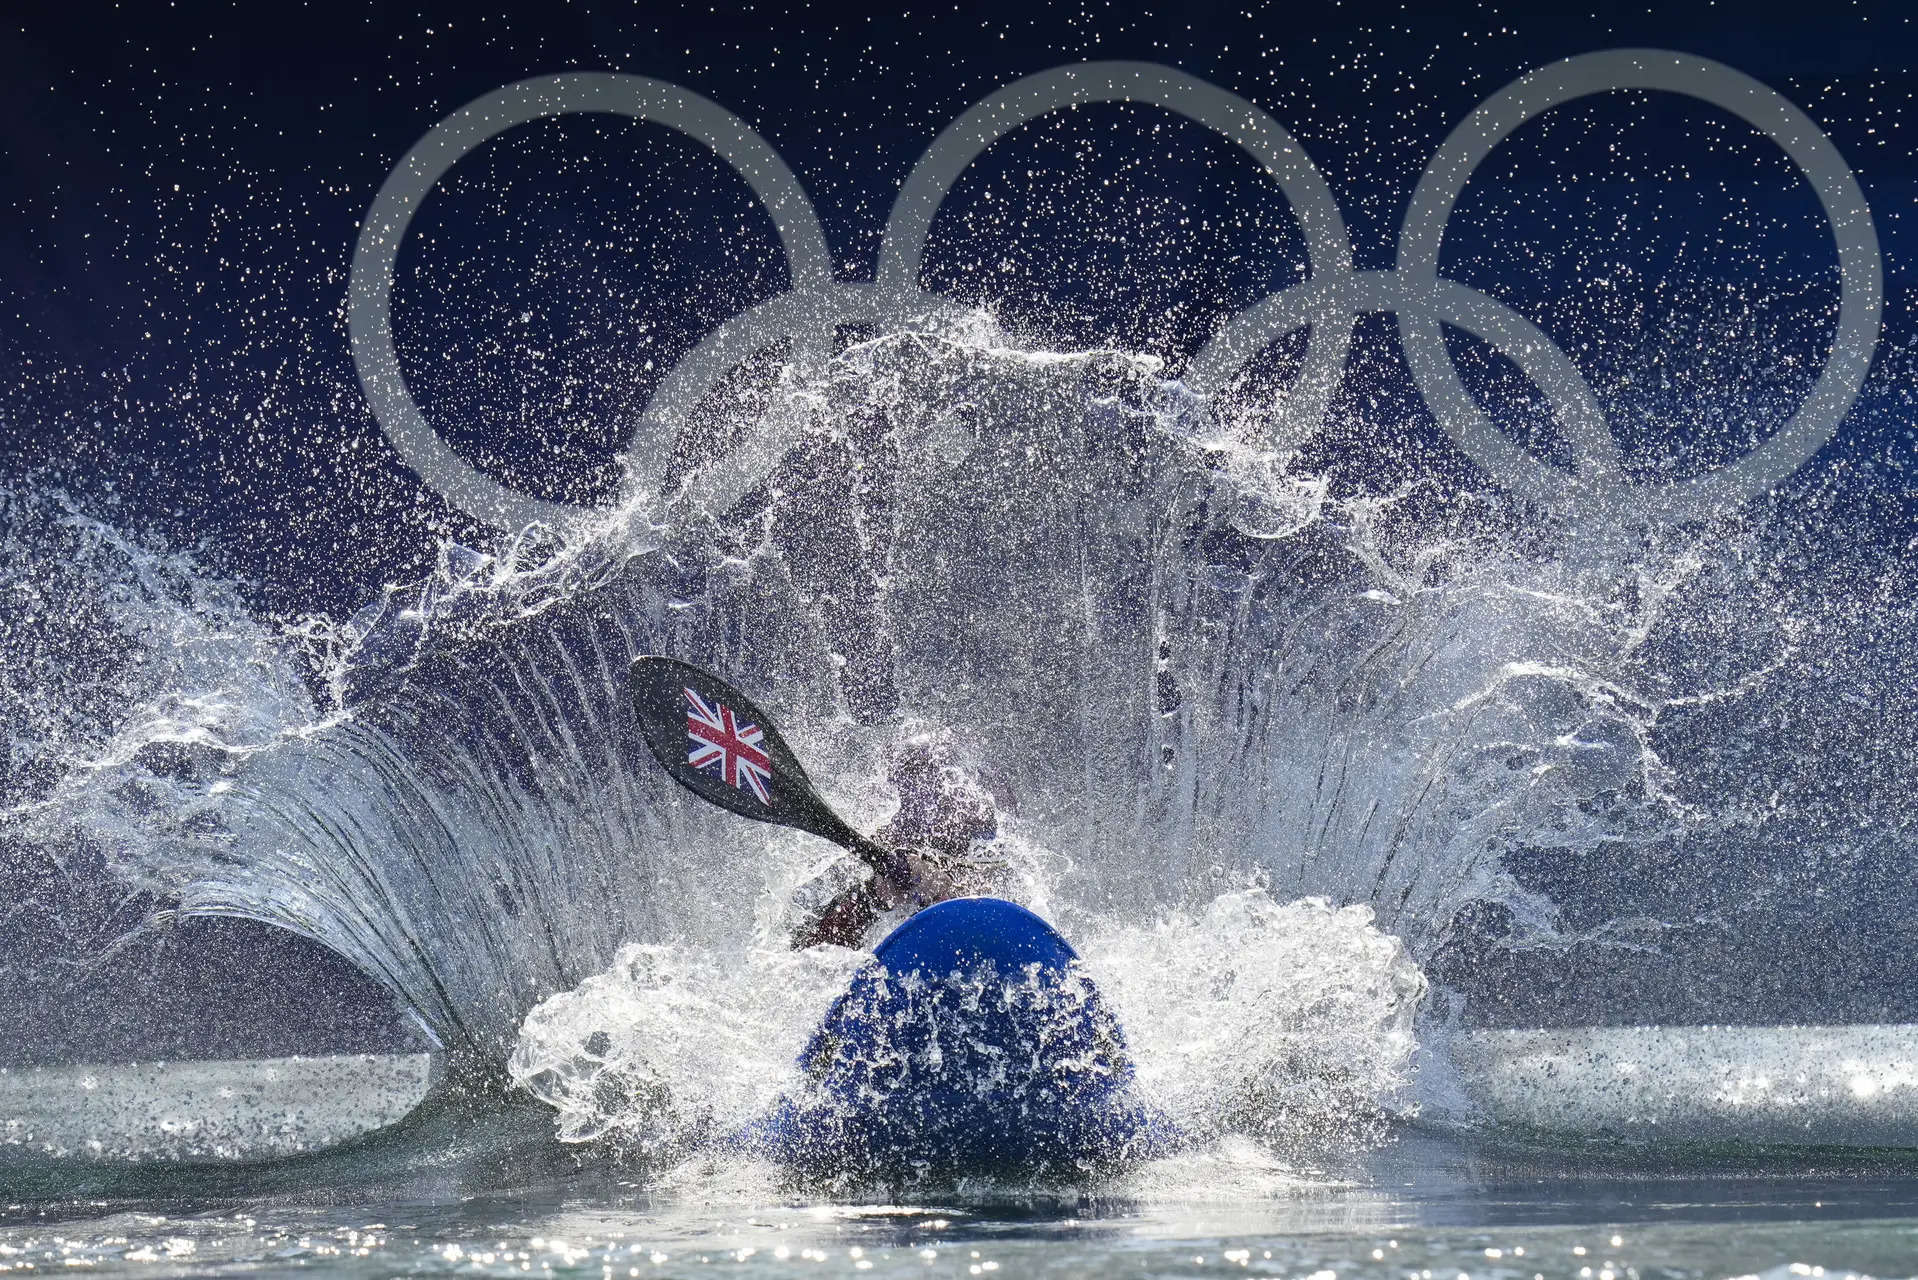 Contact kayaking? New Olympic event includes 15-foot drop, Eskimo moves and bumper-car like contact 